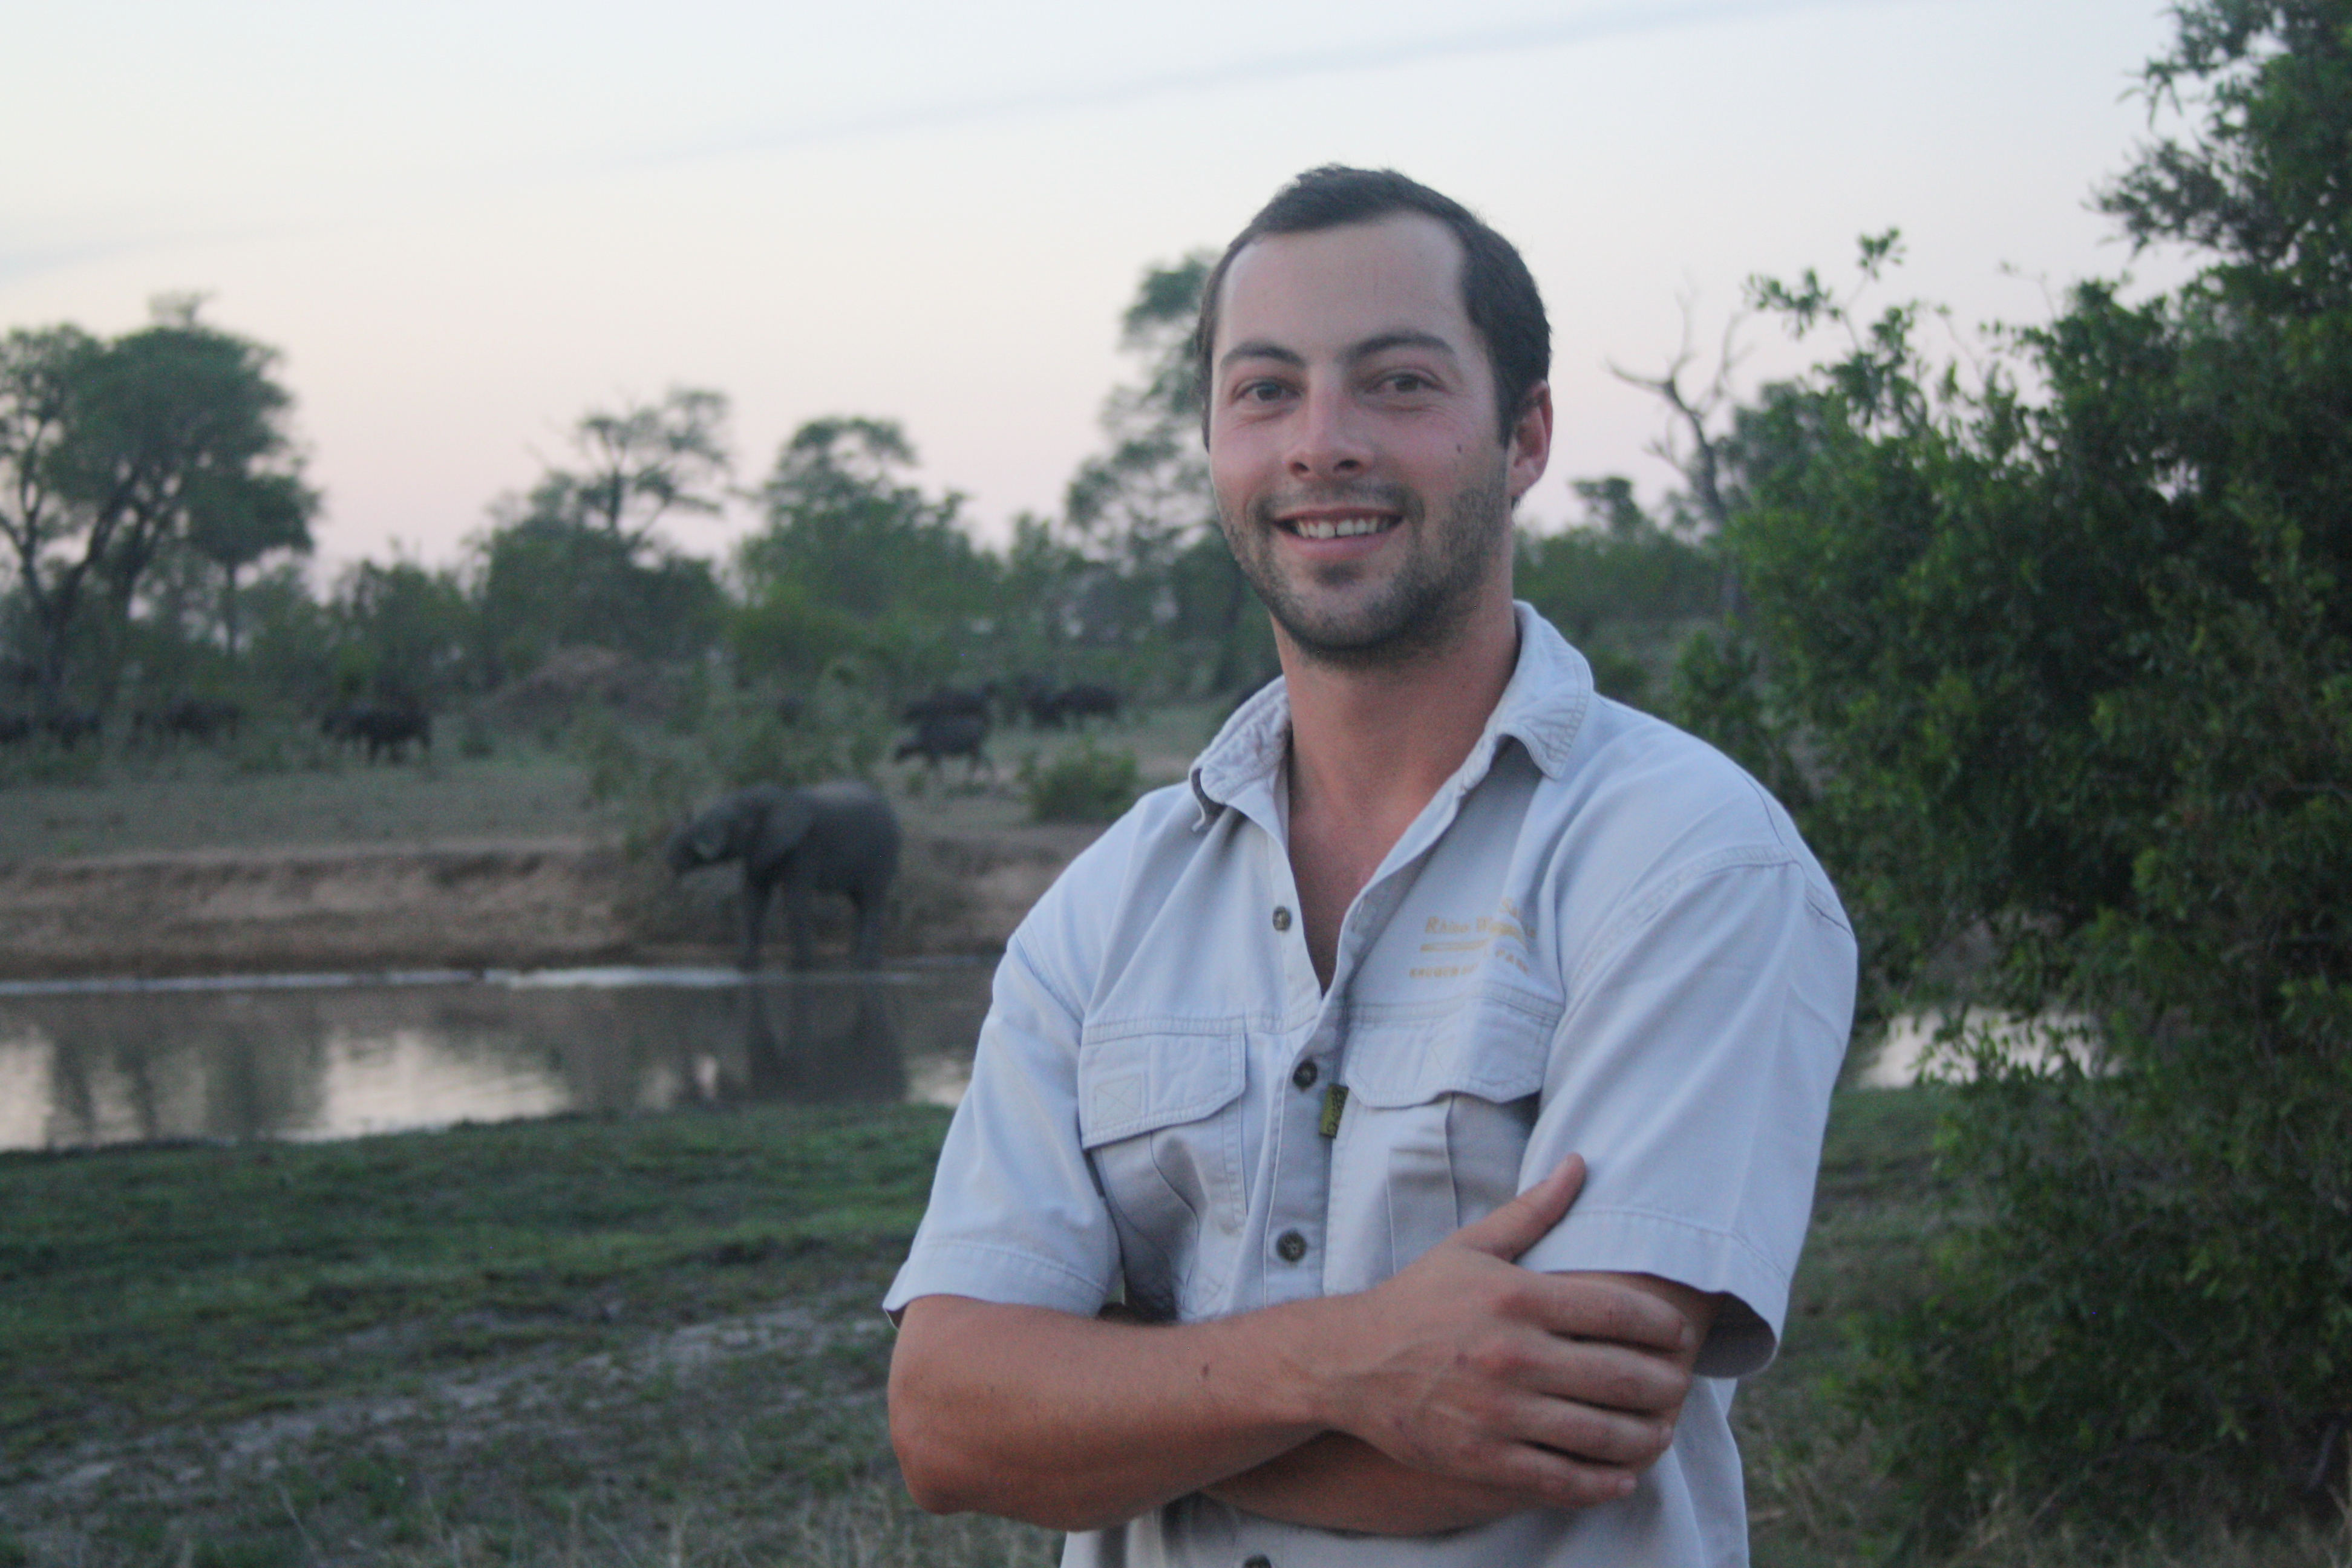 Joey Vermeulen - following his bushveld dreams, an inspiration to us all